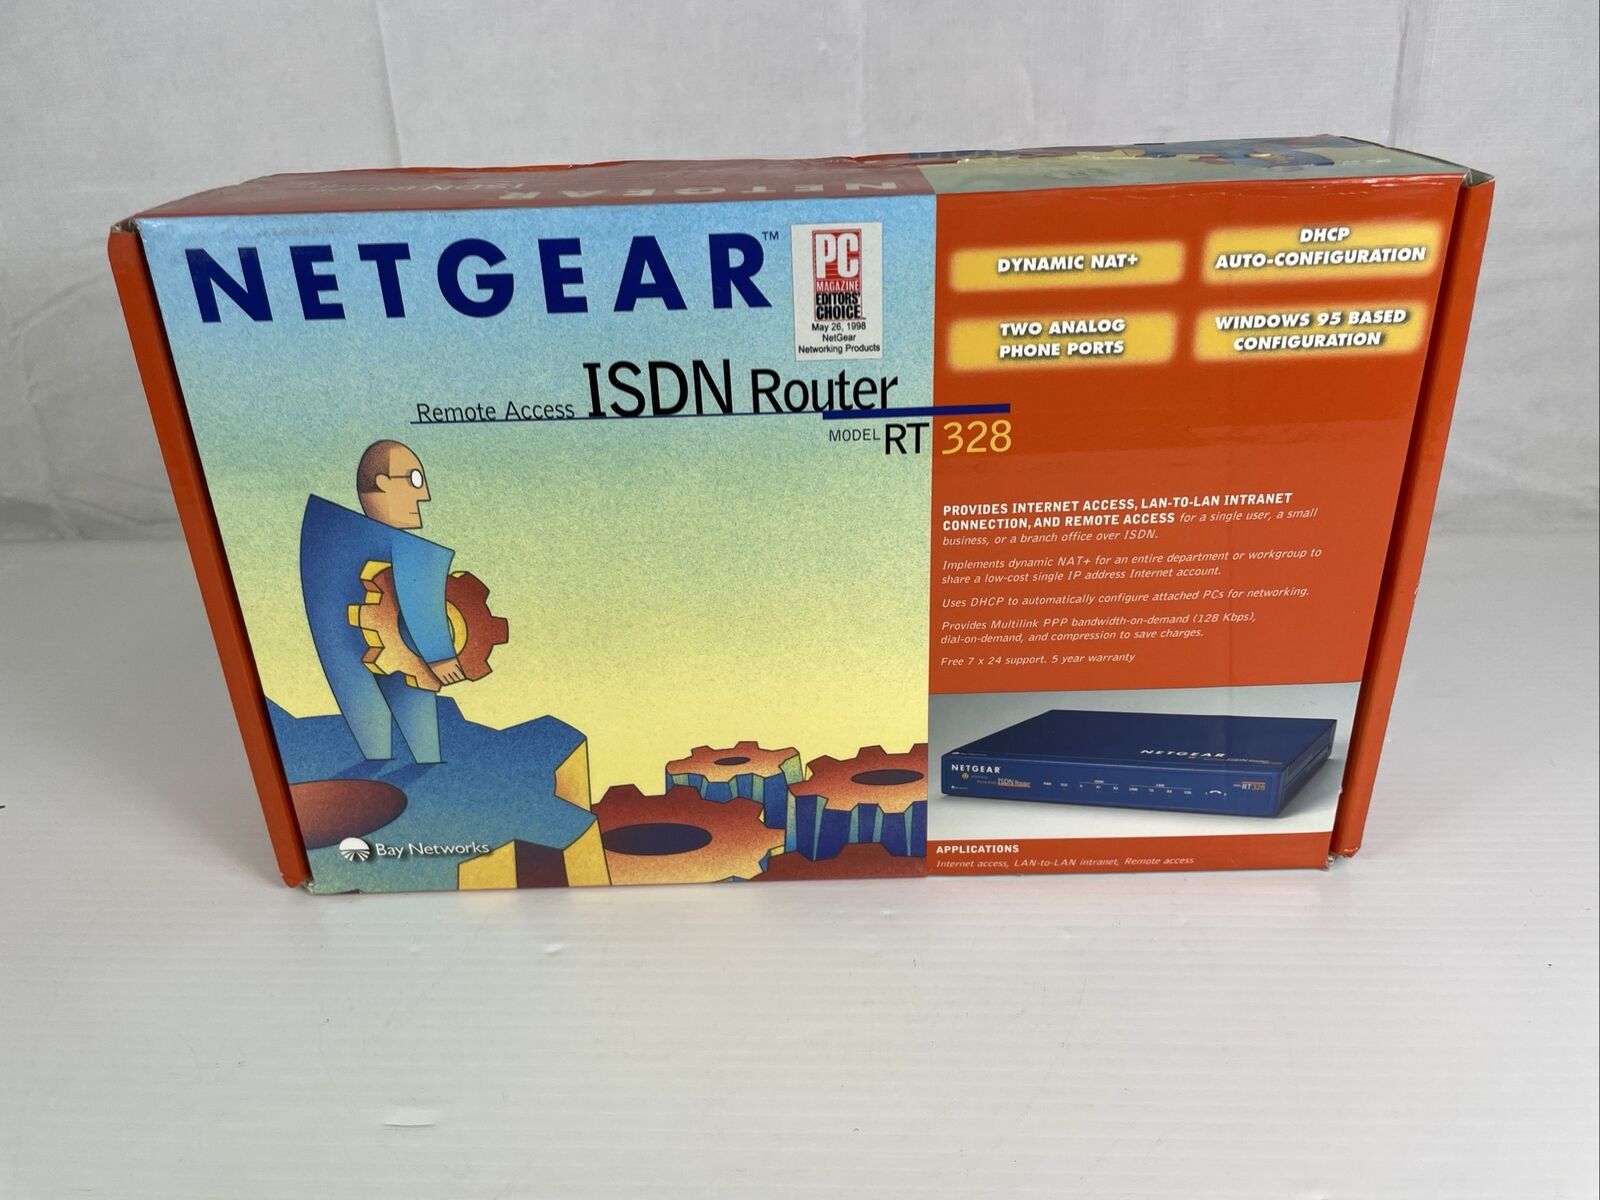 Netgear RT 328 Remote Access ISDN Router - with All Cables - Great Condition